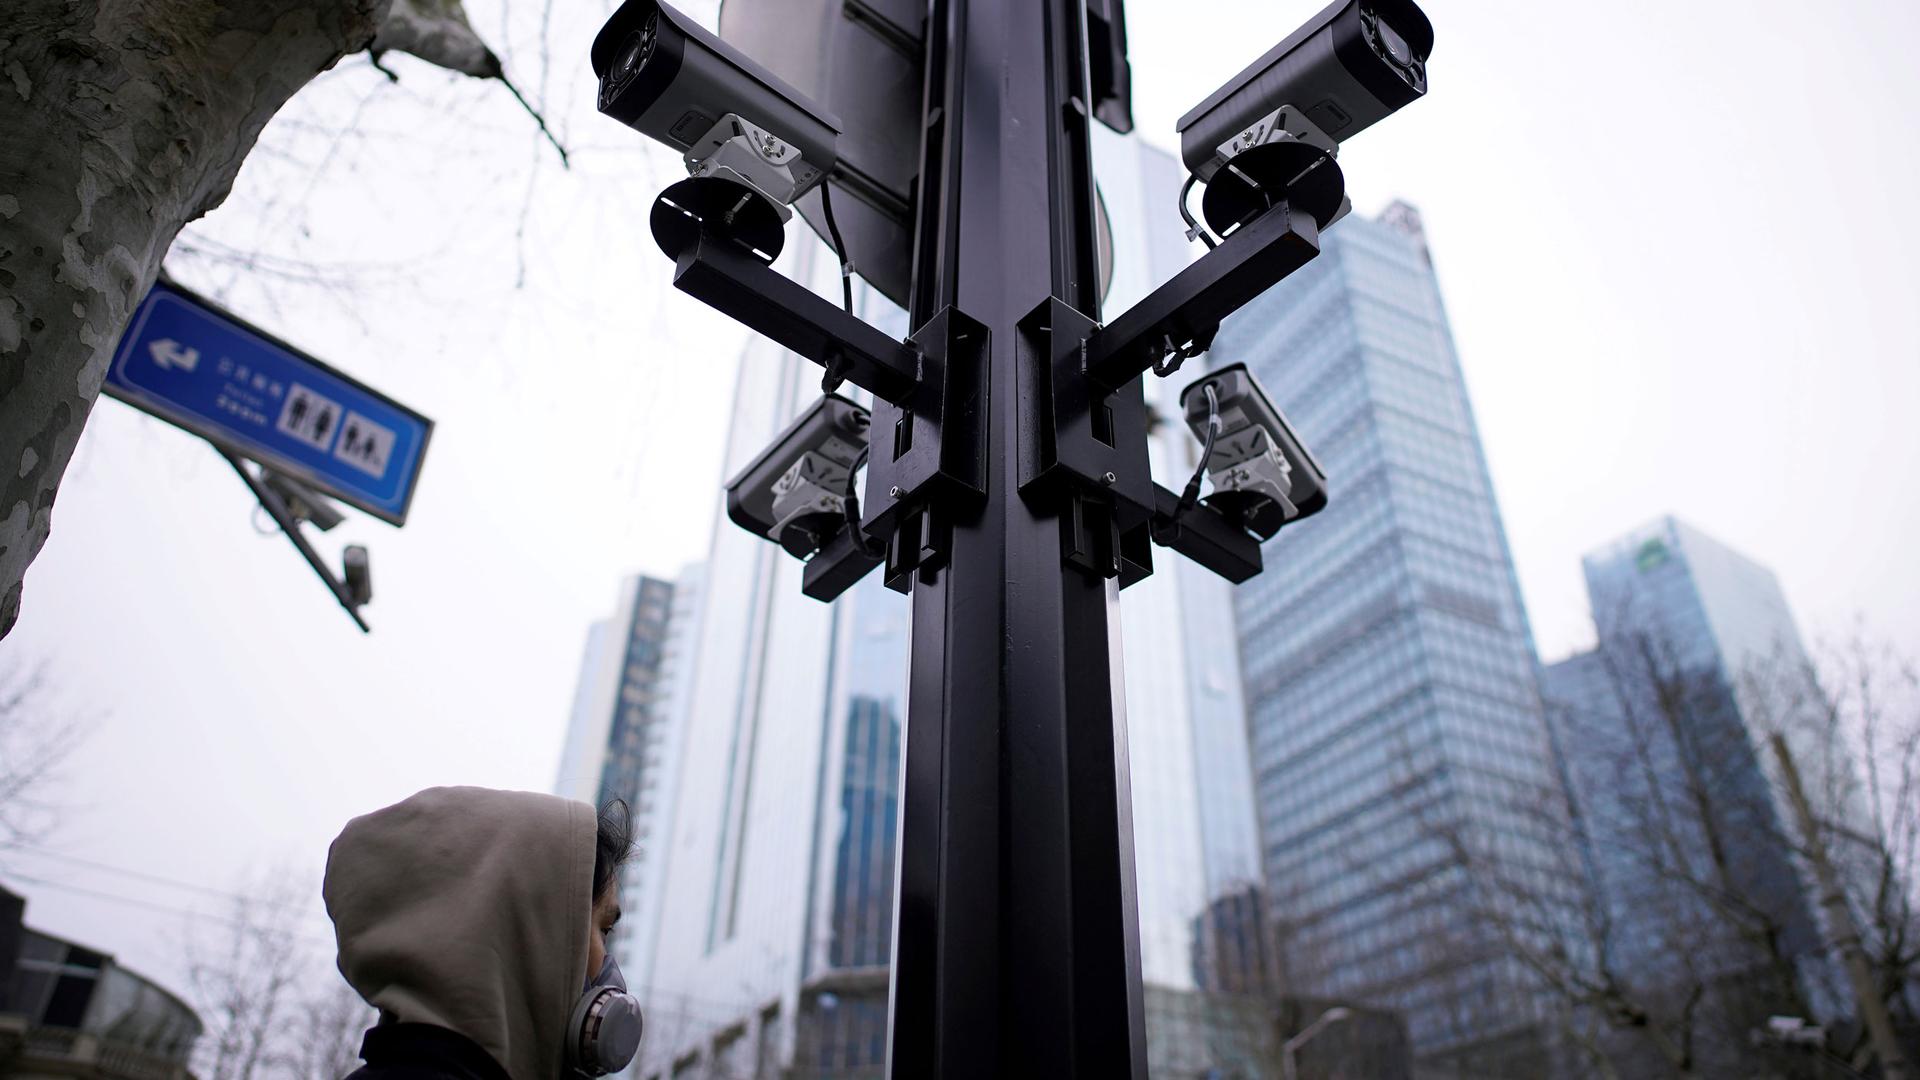 A metal poll is shown with four surveillance cameras pointed out in four separate directions as a man walks by wearing a face mask.